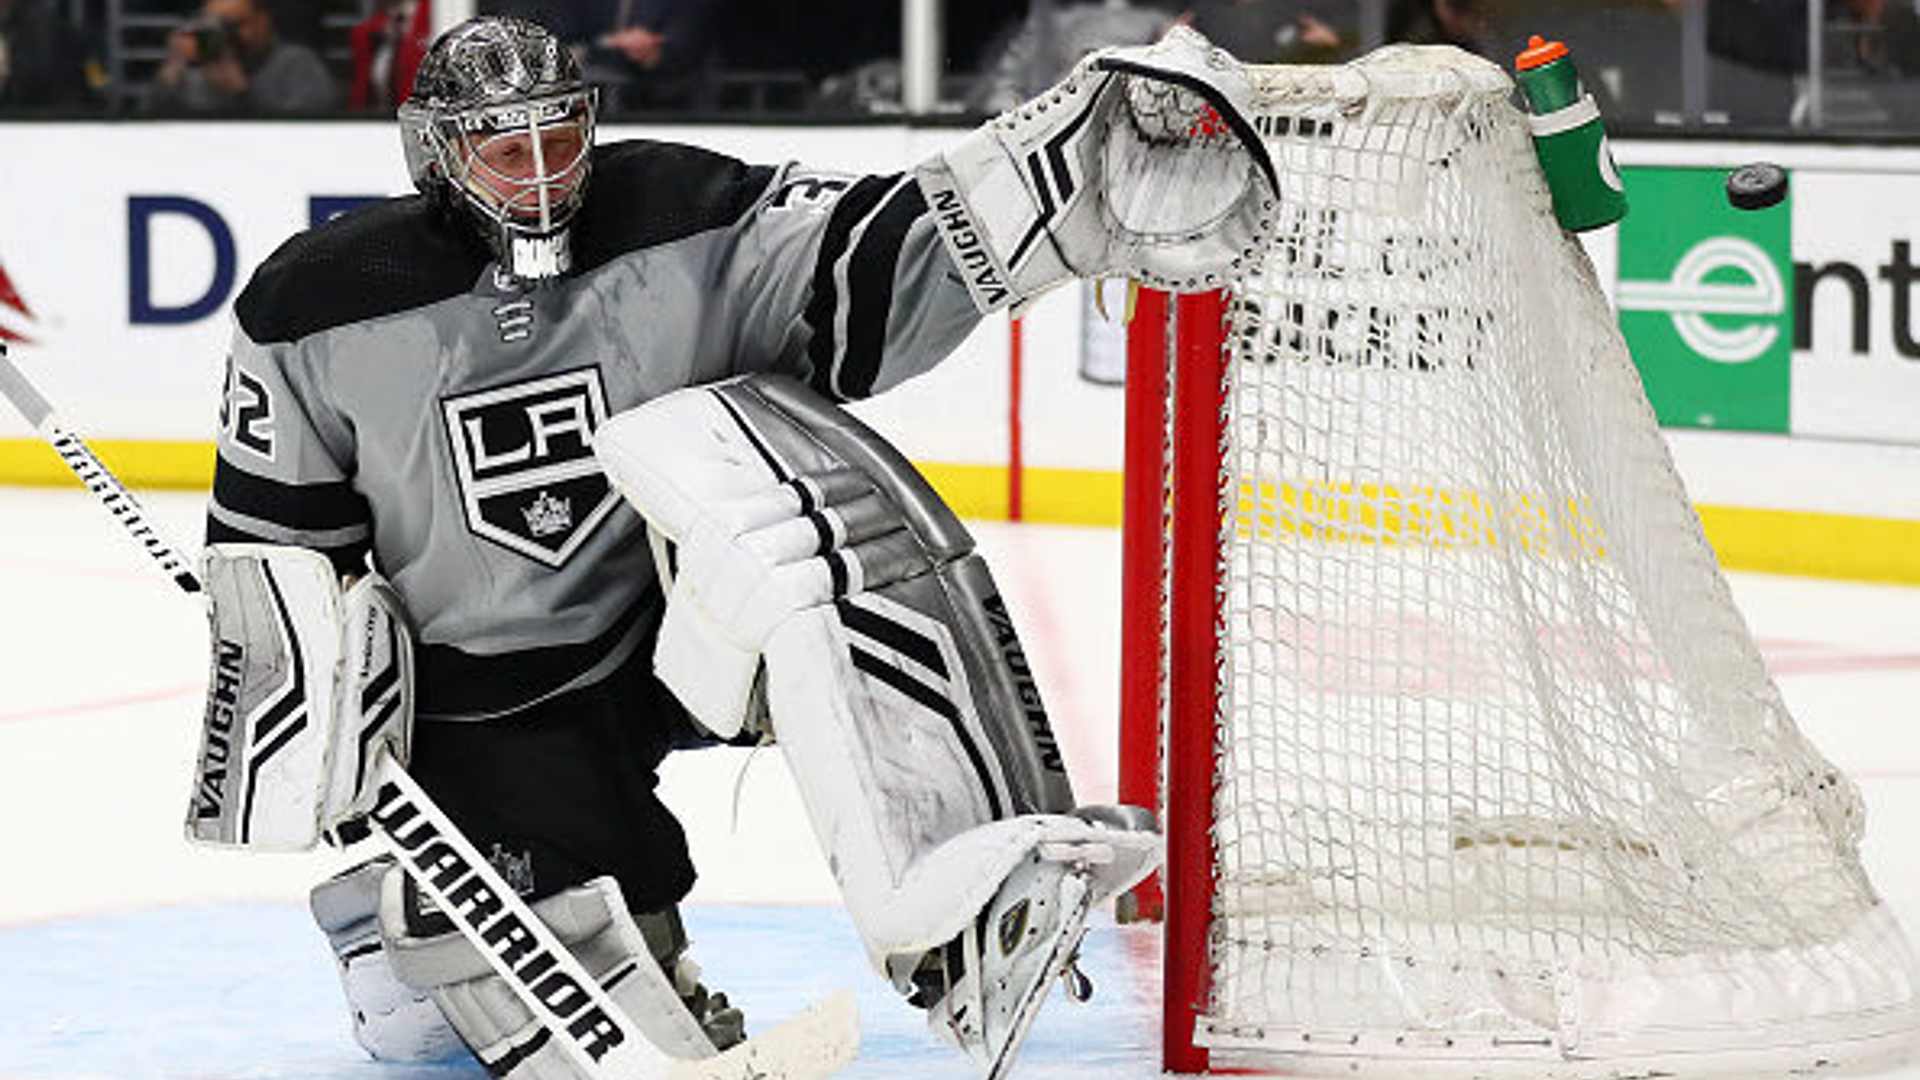 What is Jonathan Quick's networth, salary, contract status, and brand